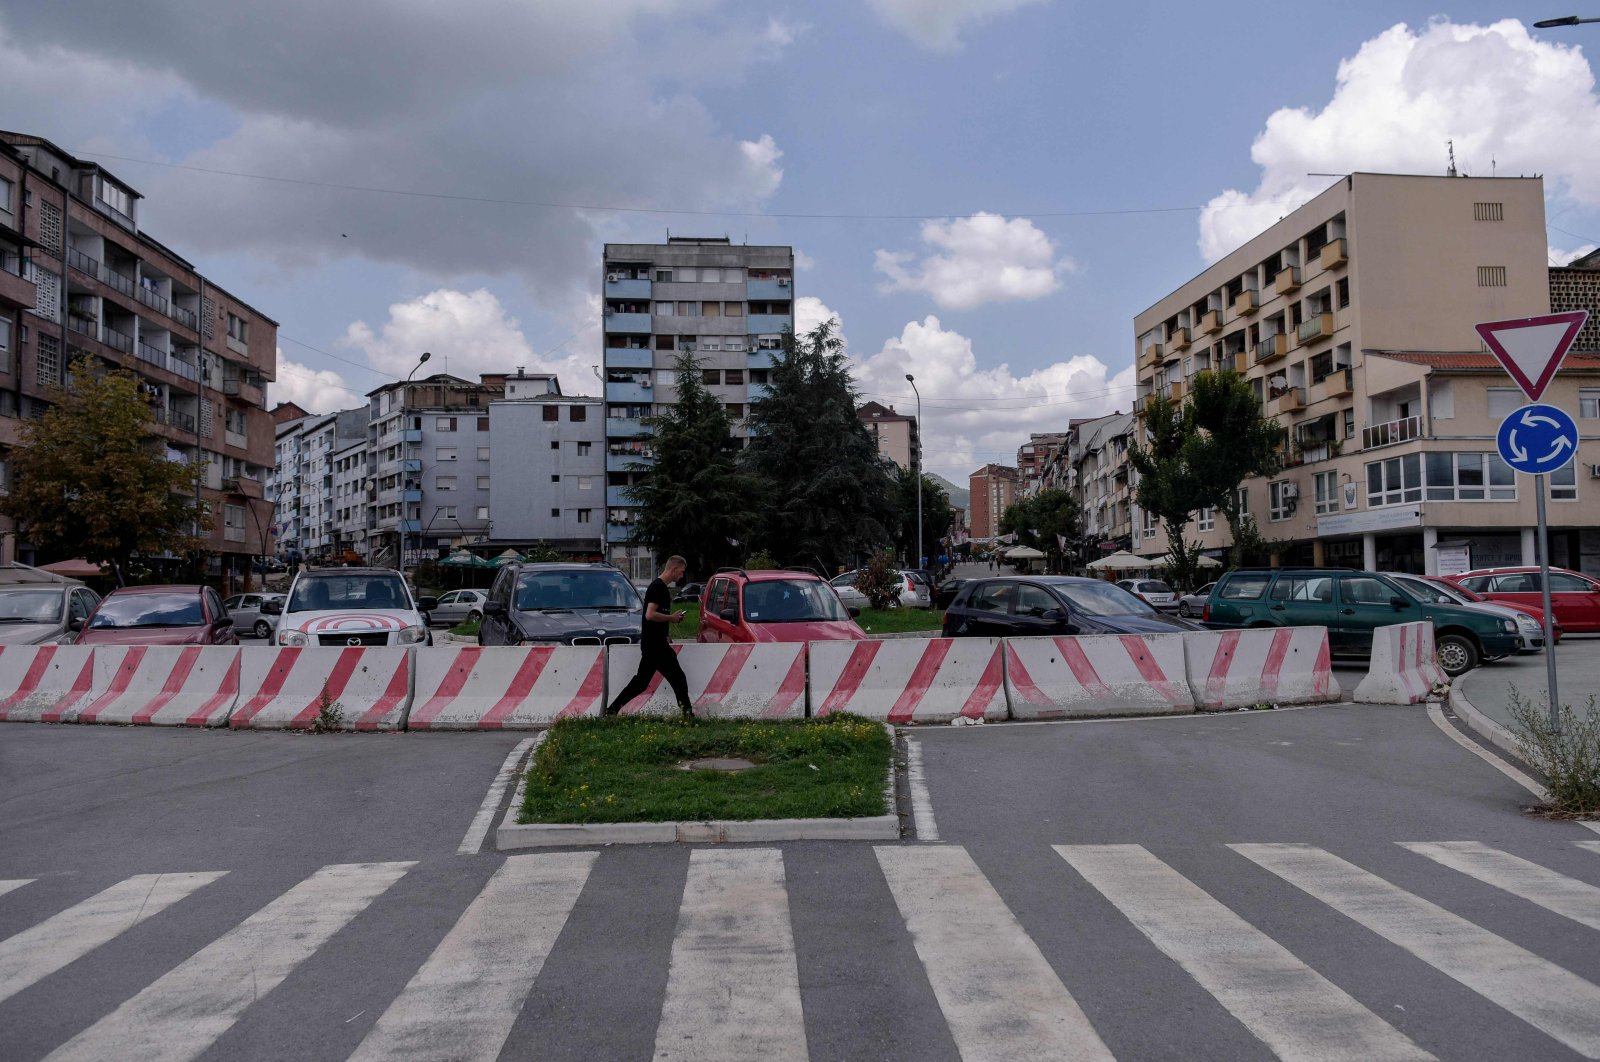 A man walks near the Ibar River bridge in the town of Mitrovica, on August 26, 2022. - Tensions between Serbia and Kosovo soared late last month when Kosovo's government declared that Serb-issued identity documents and vehicle license plates would no longer be valid in Kosovo's territory, just as Kosovo-issued ones are not valid in Serbia. (Photo by Armend NIMANI / AFP)